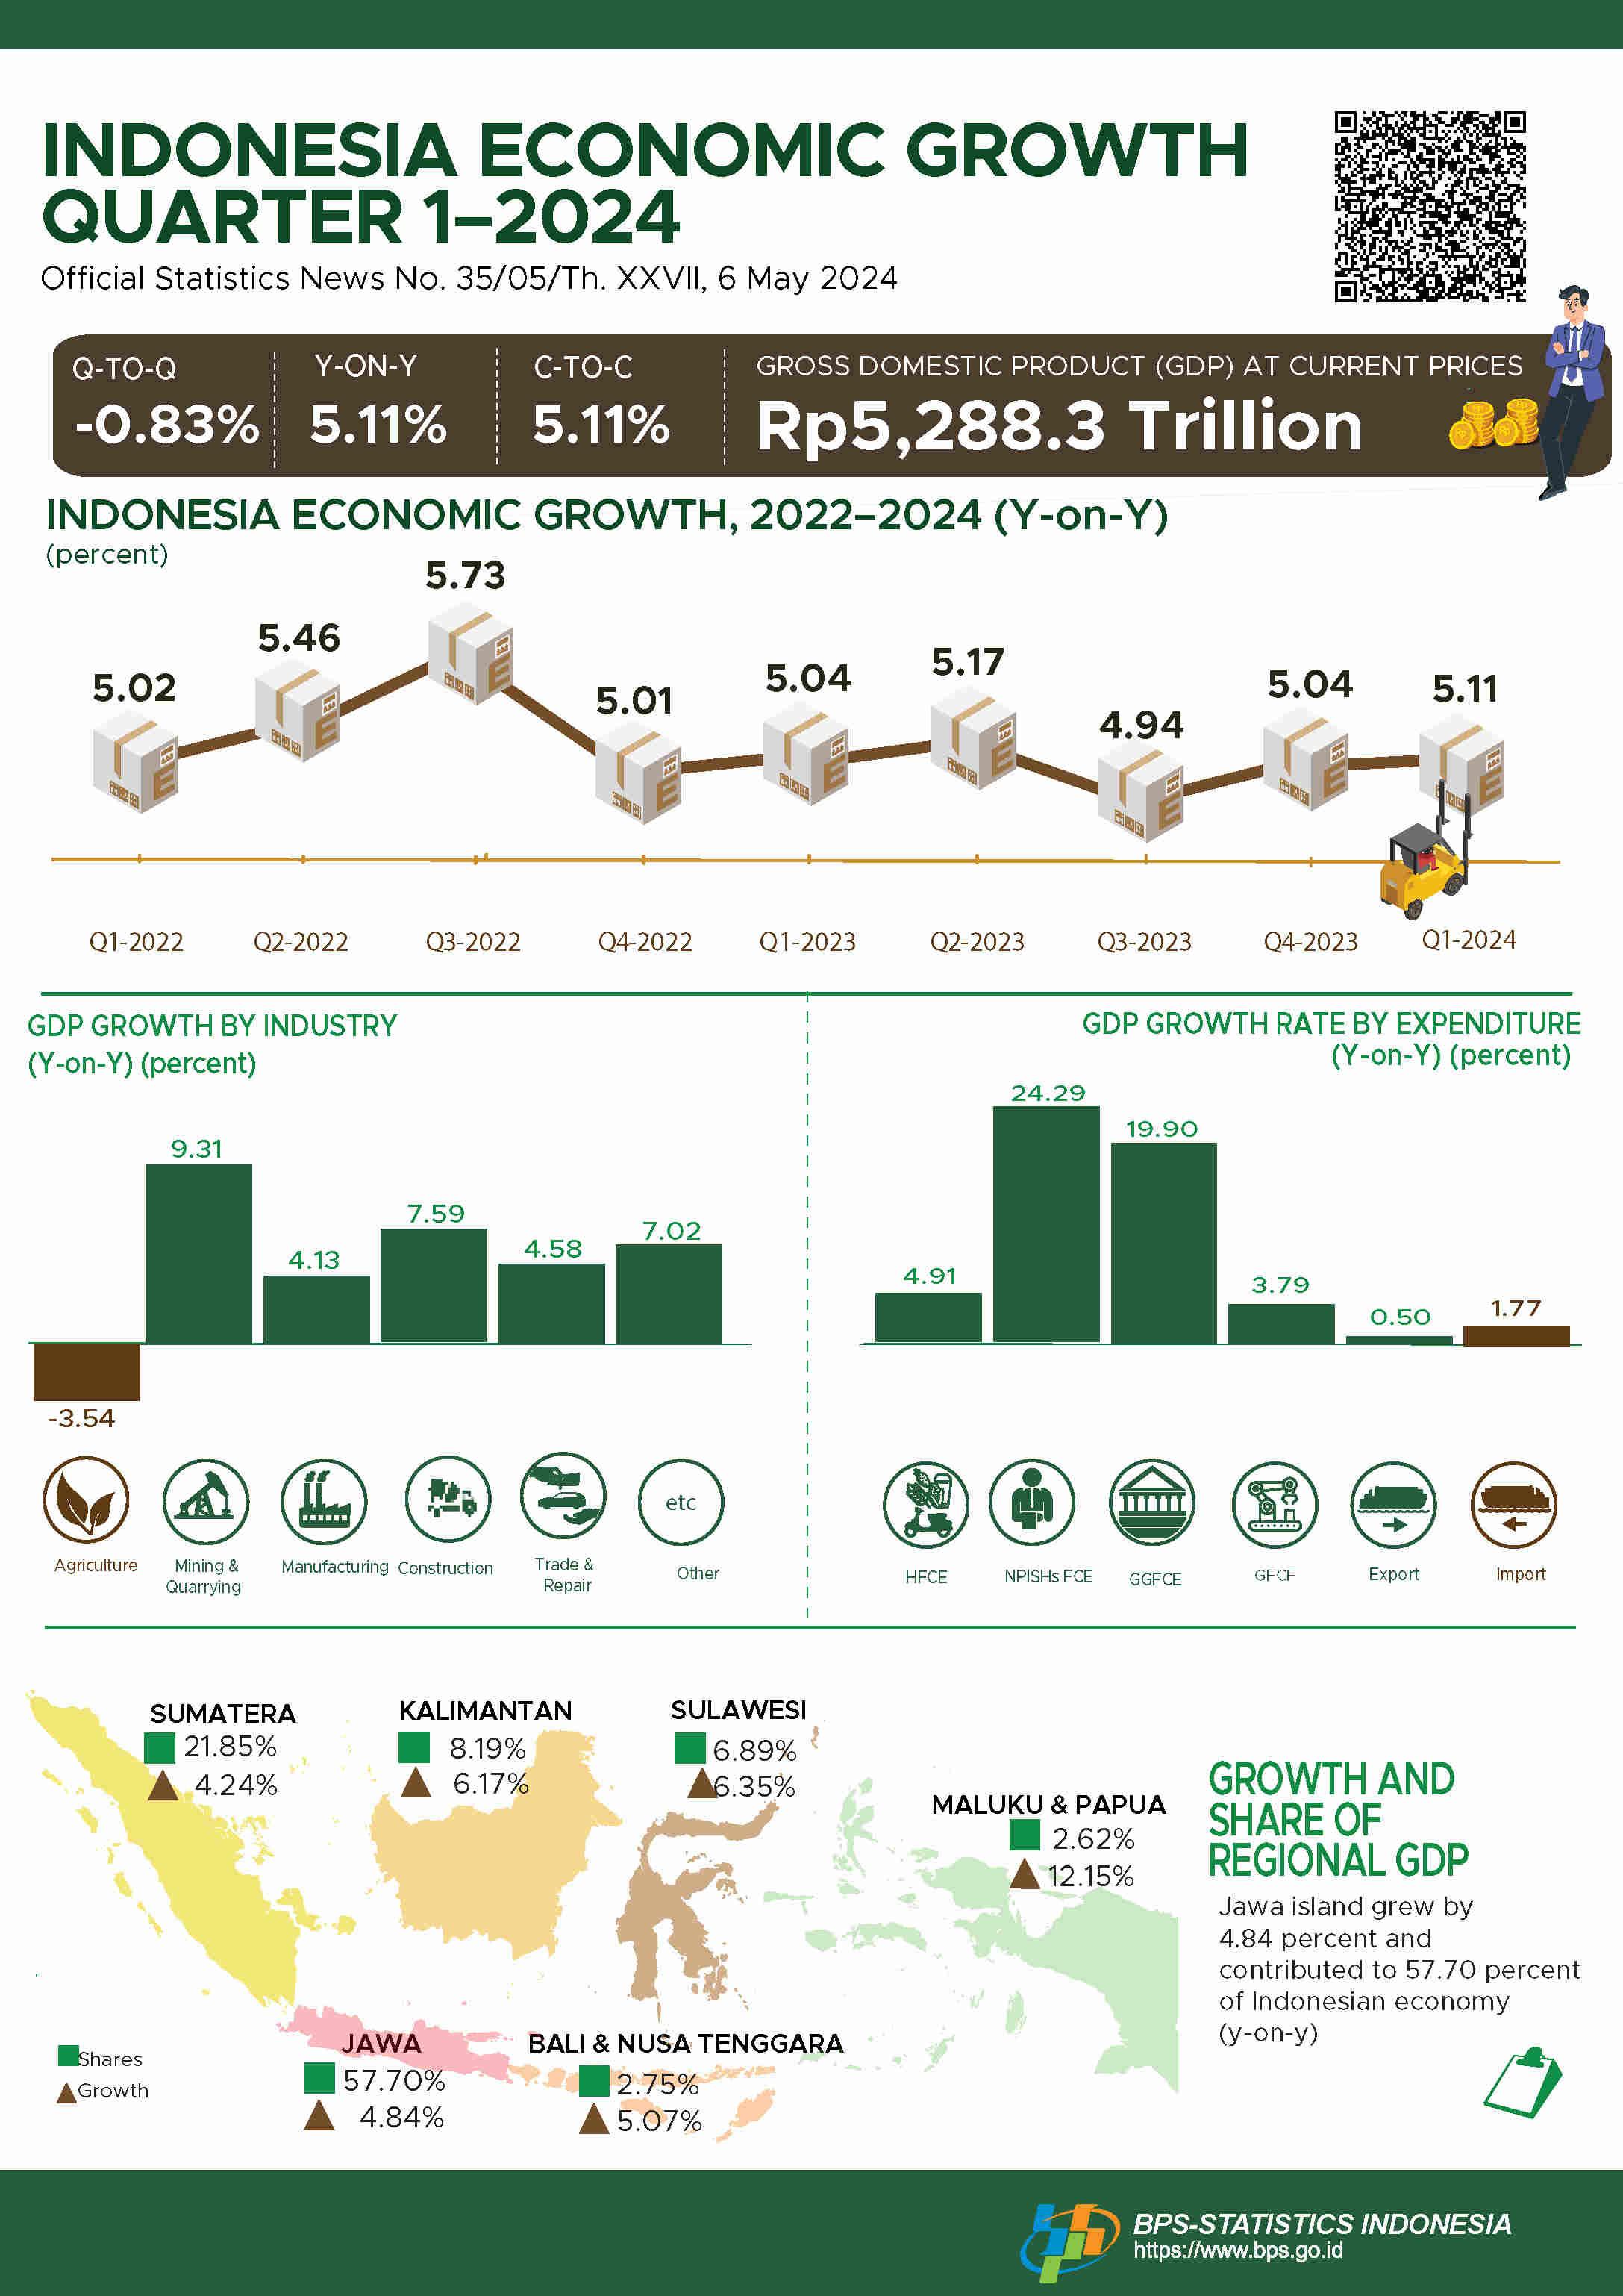 Indonesia’s GDP Growth in Q12024 was 5.11 Percent (yony) and